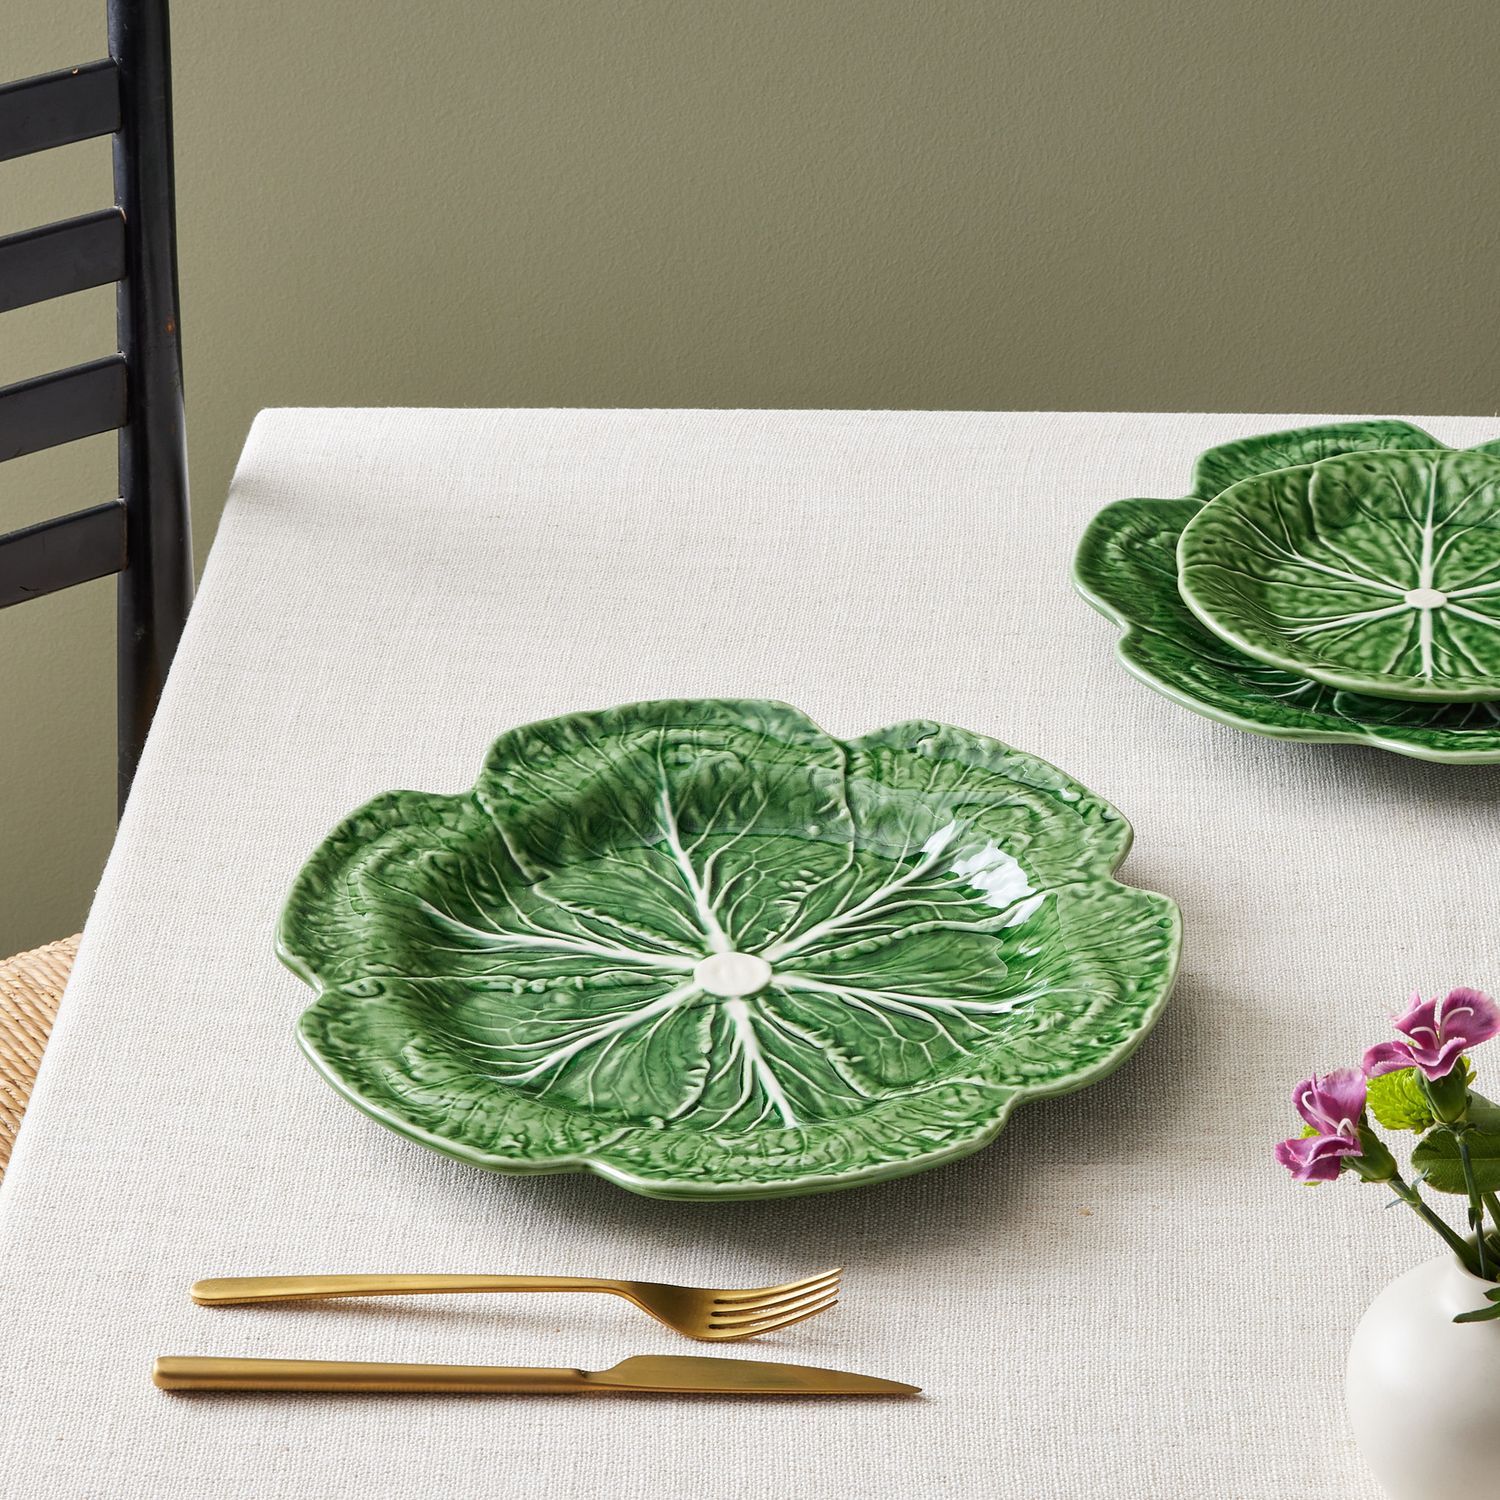 Bordallo Pinheiro Cabbage Charger Plate, Handmade in Portugal | Food52